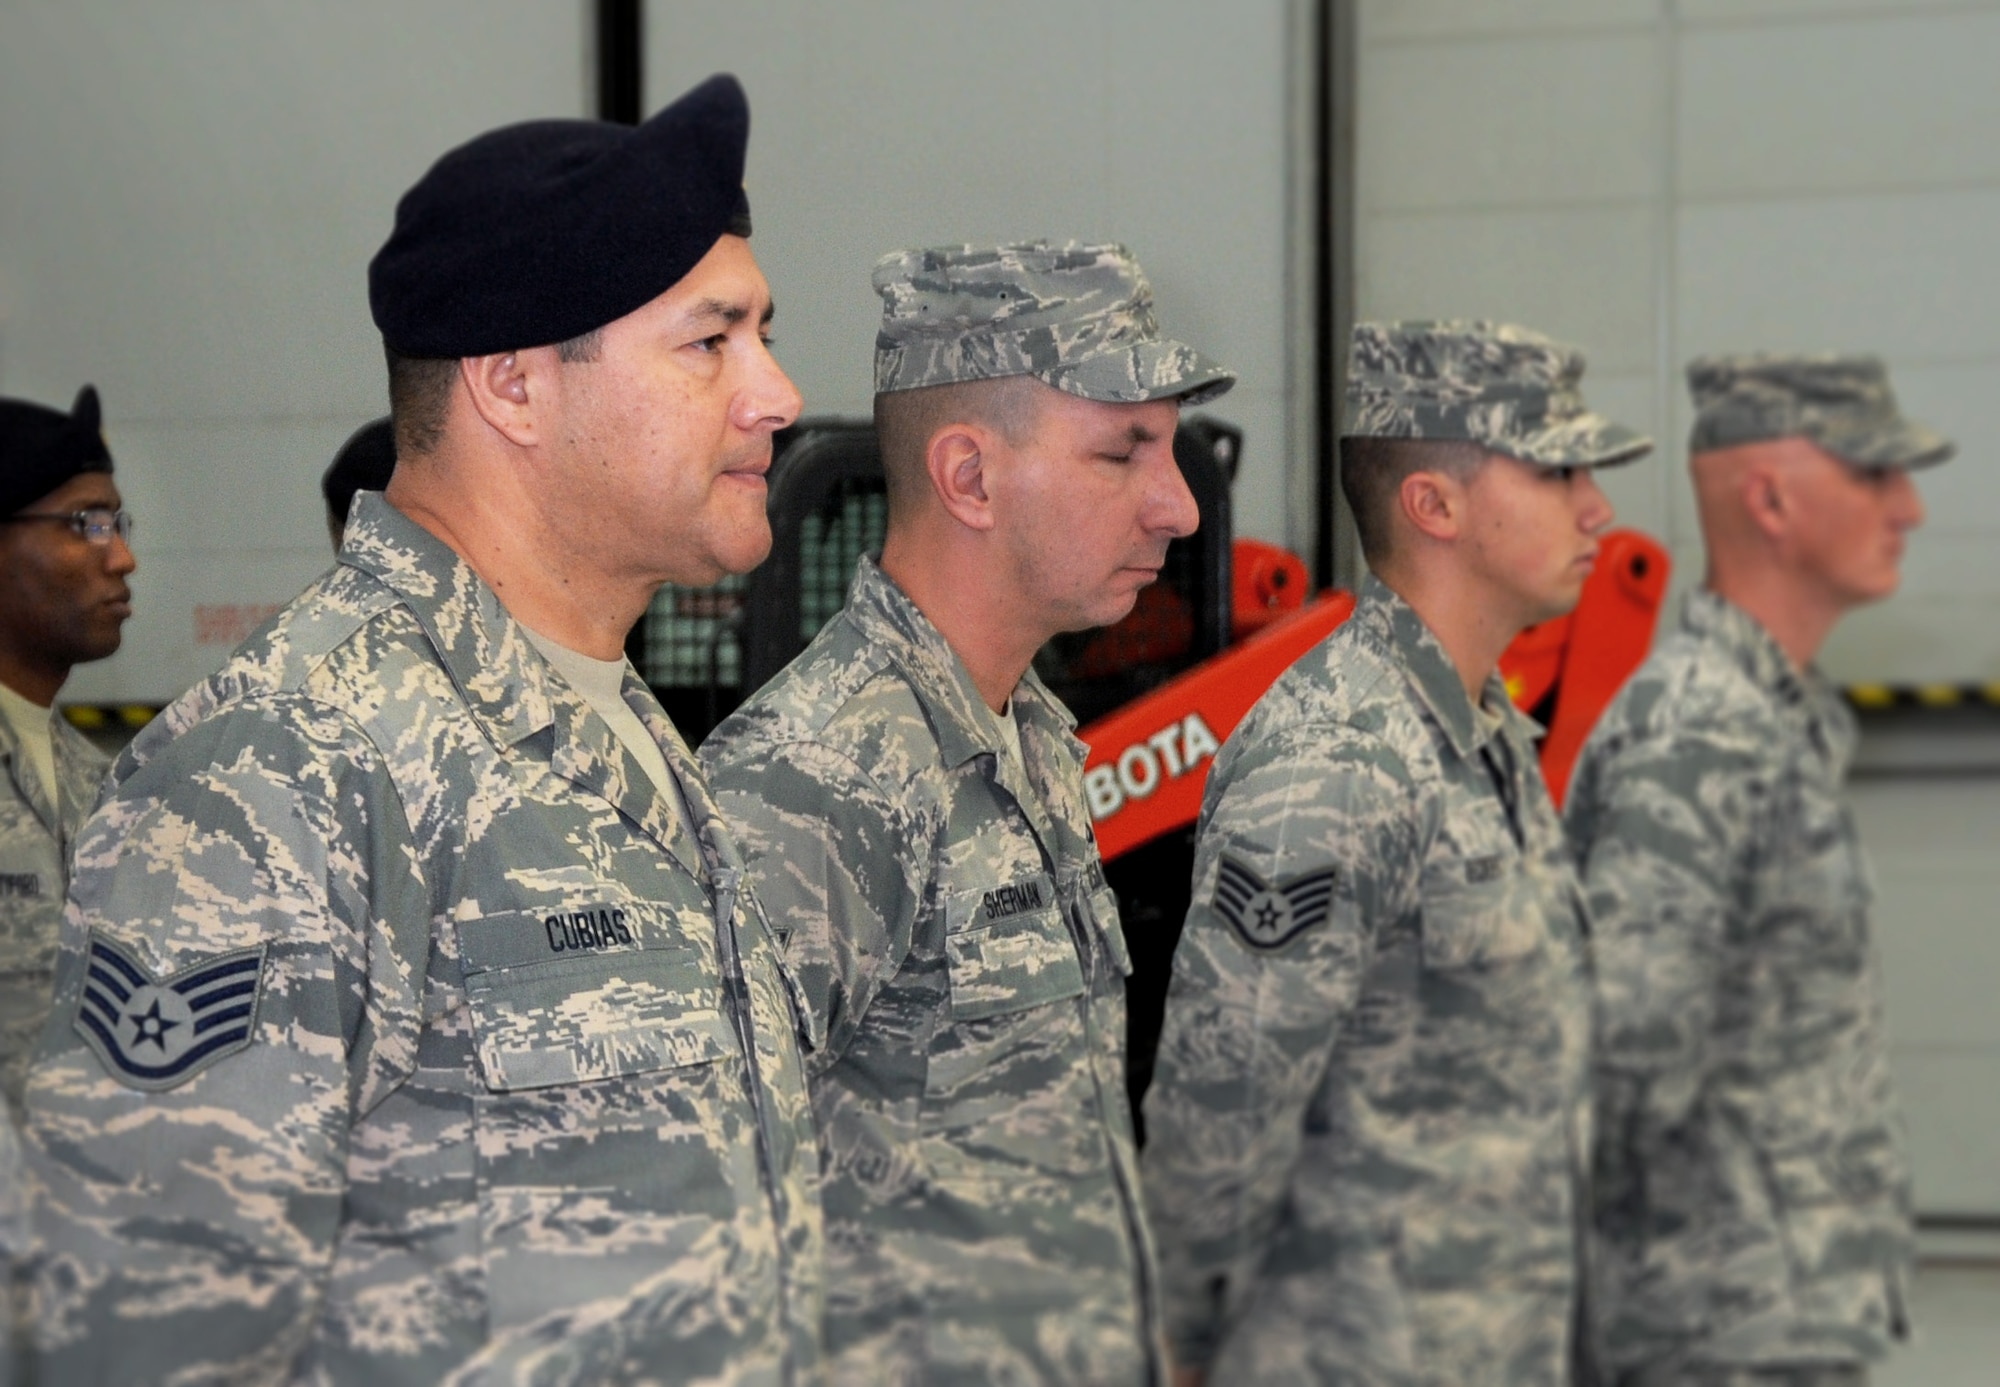 Oregon Staff Sgt. Joseph Cubias, assigned to the 142nd Fighter Wing Security Forces Squadron, stands in formation and listens to remarks during the Demobilization Ceremony for the 142nd Fighter Wing Civil Engineer Squadron and Security Forces Squadron at the Portland Air National Guard Base, Ore., Dec. 7, 2014. (U.S. Air National Guard photo by Tech. Sgt. John Hughel, 142nd Fighter Wing Public Affairs/Released)